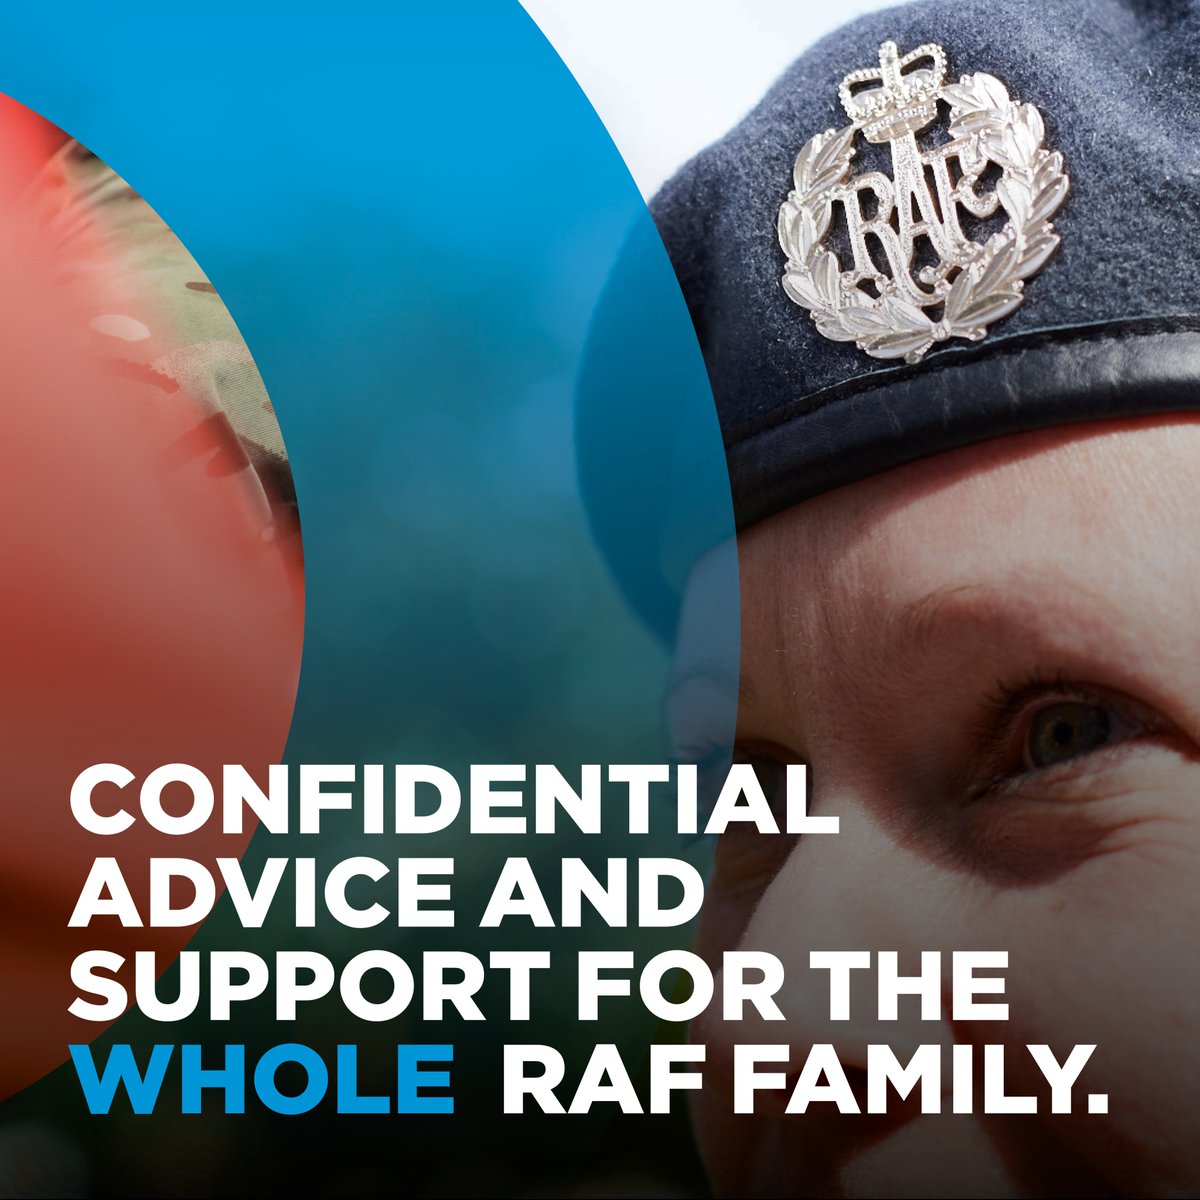 SSAFA has refreshed and modernised its RAF service support. The new service makes it easier to get in touch with its team of welfare officers via WhatsApp or Live Chat. They can also be called on their helpline, emailed or found on most RAF stations ▸ ssaf.as/1BZ 👇